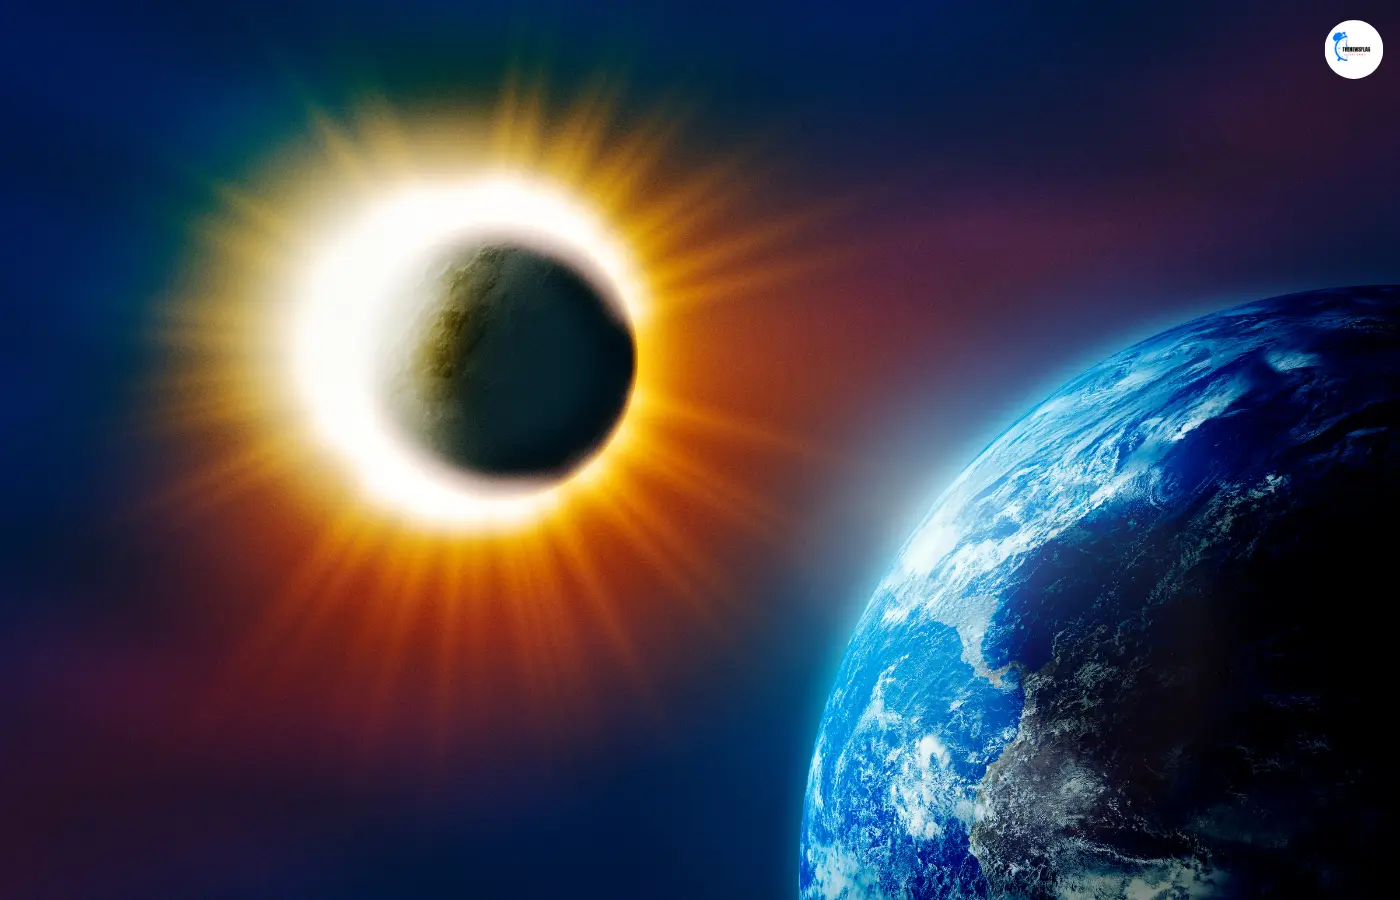 Should you be outside during a solar eclipse?